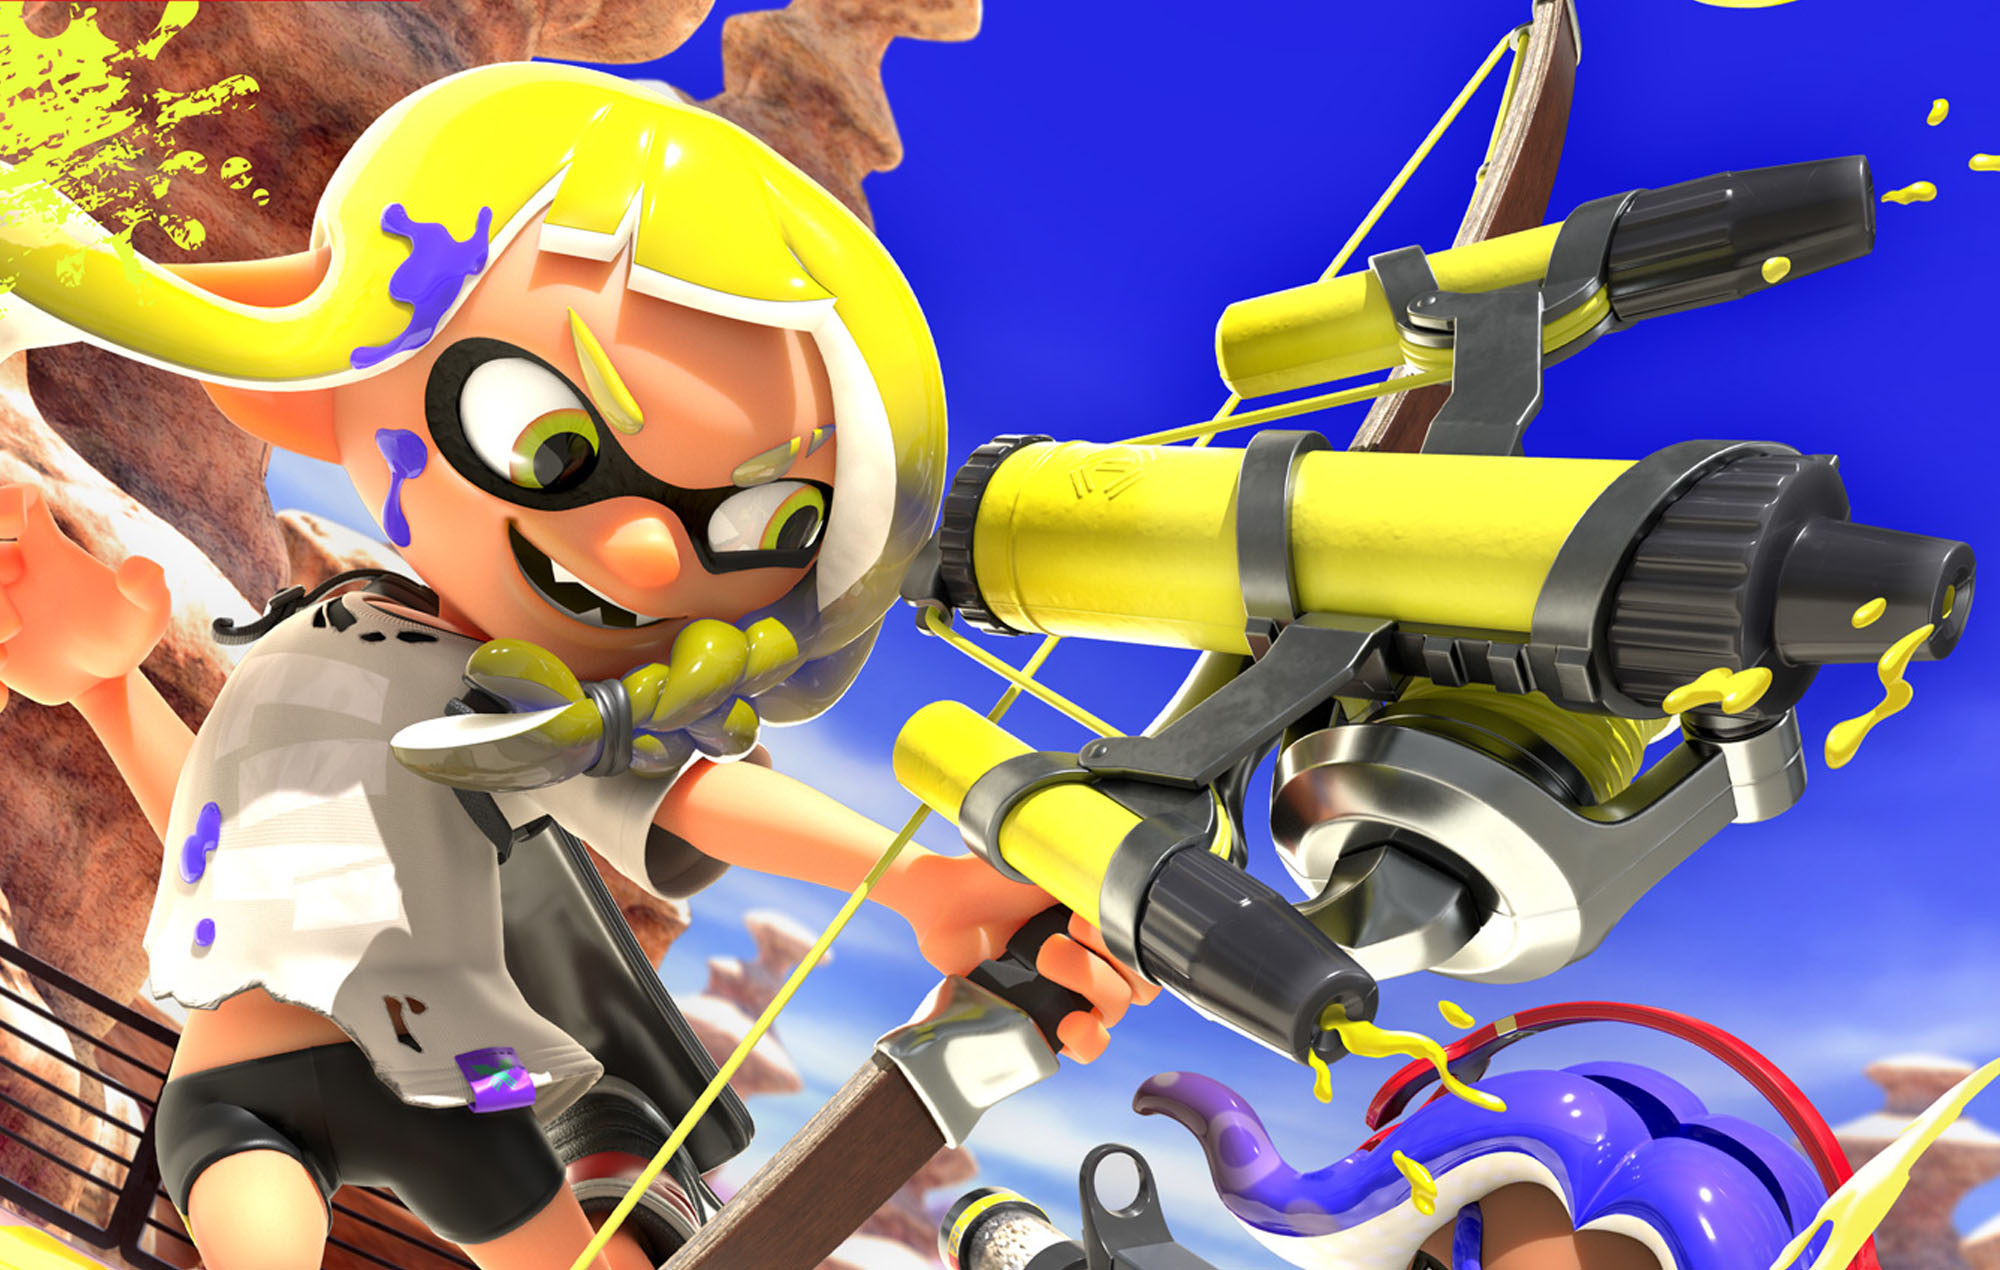 Splatoon 3: A shooter, First announced in a Nintendo Direct on February 17th, 2021. 2000x1270 HD Wallpaper.